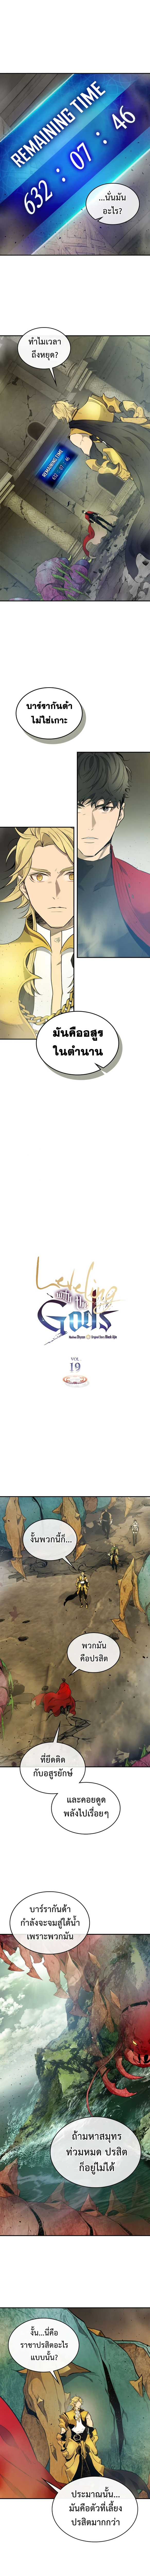 Leveling With The Gods19 (2)